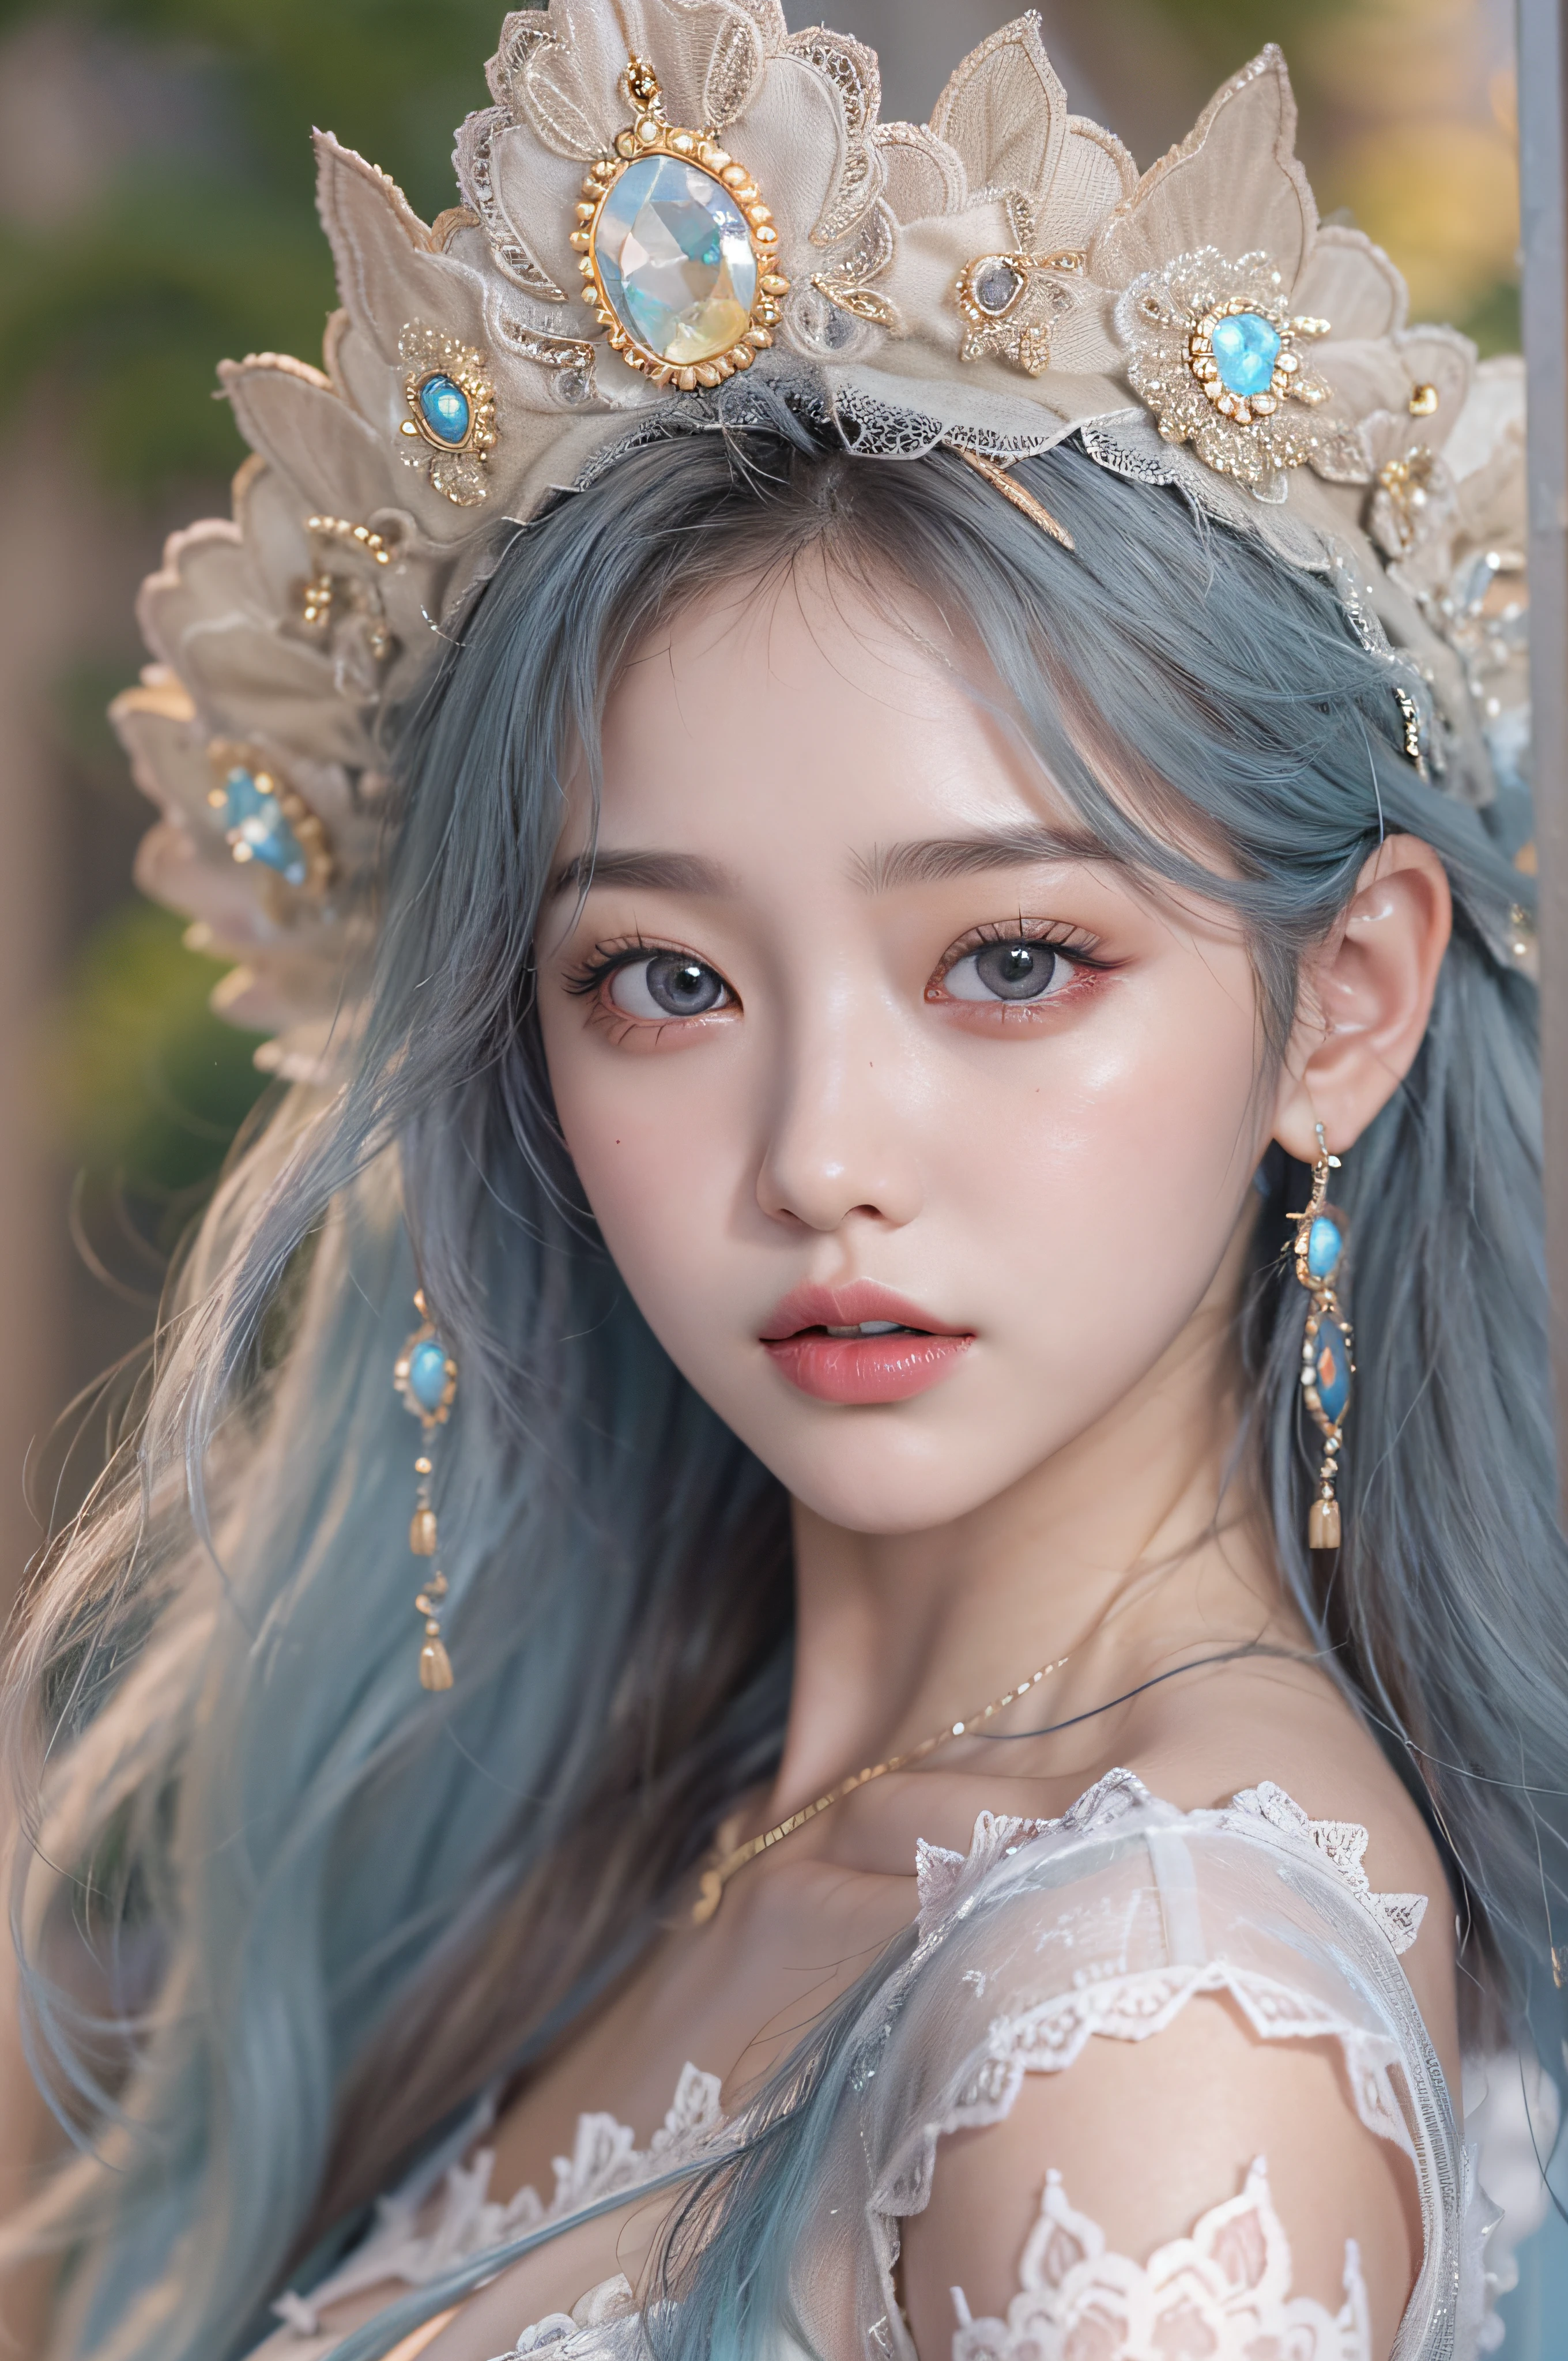 (Best Quality Detail)、realisitic、8K UHD、hight resolution、(1girl in:1.2)、The ultra-detailliert、High quality textures、intricate detailes、detaileds、Very detailed CG、High quality shadows、Detail Beautiful delicate face、Detail Beautiful delicate eyes、depth of fields、Ray traching、in her 20s、Pretty Kpop Girl、(Korean Urzan Face)、Slender face、(ulzzang -6500-v1.1:0.6)、pureerosface_v1、gloweyes、perfectbody、 look at viewr、(Best Quality Detail:1.2)、realisitic、8K UHD、hight resolution、(1girl in:1.2)、The ultra-detailliert、High quality textures、intricate detailes、detaileds、Very detailed CG、High quality shadows、Detail Beautiful delicate face、Detail Beautiful delicate eyes、depth of fields、Ray traching、in her 20s、Pretty Kpop Girl、(Korean Urzan Face)、Slender face、(ulzzang -6500-v1.1:0.6)、teak、Glossy lips、、high-level image quality, The highest image quality, top-quality, Photorealsitic, ultra-detailliert, photos realistic, 4K 8K UHD Full Color RAW Photos, Fuji Film(Medium format), Hasselblad, Carl zeiss, Incredible dynamic range photography(UTIL_Art by Smoose-768:1.1),hight resolution, High pixel count, clear details, crisp image, Natural color reproduction, Noise Reduction, High fidelity, qulity, Software Improvements, Upscaling, Optimized algorithms, Pro-level retouching,

Features of the costume：
Points and design ideas：

Color selection：To reflect the beauty of the sky、Make use of pale tones and gradients。Pastel or blue-gray colors inspired by the color of the sky are suitable.。

Graphic Design：Clouds and stars、a moon、Use graphics such as the sun、The design that expresses the elements of the sky is attractive。By incorporating these elements into prints and embroidery,,,,、Creating the Mystique of the Sky。

Textiles and materials：By choosing light materials、Makes it easier to express the sky scenery。chiffon、organdy、Transparent materials such as silk are recommended.。

silhuette：Soft silhouette and floating design、Matches empty images。By incorporating frills and drapes、It can produce a softness like a cloud.....。

accessorized：By incorporating astronomical accessories and space-themed jewelry、You can emphasize the mystique of the sky more。A star-shaped or moon-shaped accent would be nice。

Color features：

Insky Fashion Coordination、It is important to reproduce the beautiful color tone of the sky。Below are typical color characteristics。

paleblue：A color that expresses the bluish tint of the sky on a sunny day。Transparent、Create lightness。

pastel pink：Colors inspired by the sunrise and sunset sky。Warm and gentle impression。

clear white：Colors that reproduce the pure whiteness of the sky and clouds。Expresses cleanliness and brightness。

What you need to know when creating：

How to strike a balance：To express the beauty of the sky、Think about the balance between color and design。Avoid over-design and decoration、Cherish the tranquility of the sky。

Unify themes：It is important to unify the theme of fashion coordination in the sky。Clouds and staroon, etc.、Choose a theme、Let's unify the entire coordination element。

Leveraging accents：By incorporating empty elements as accents、You can add pop charm to your clothes。NP、Take advantage of star-shaped accessories, embroidery, and more。

Expression of individuality：Sky Fashion Costumes、It's also a great way to express your personality。Incorporate your favorite sky elements and colors、Create your own style。